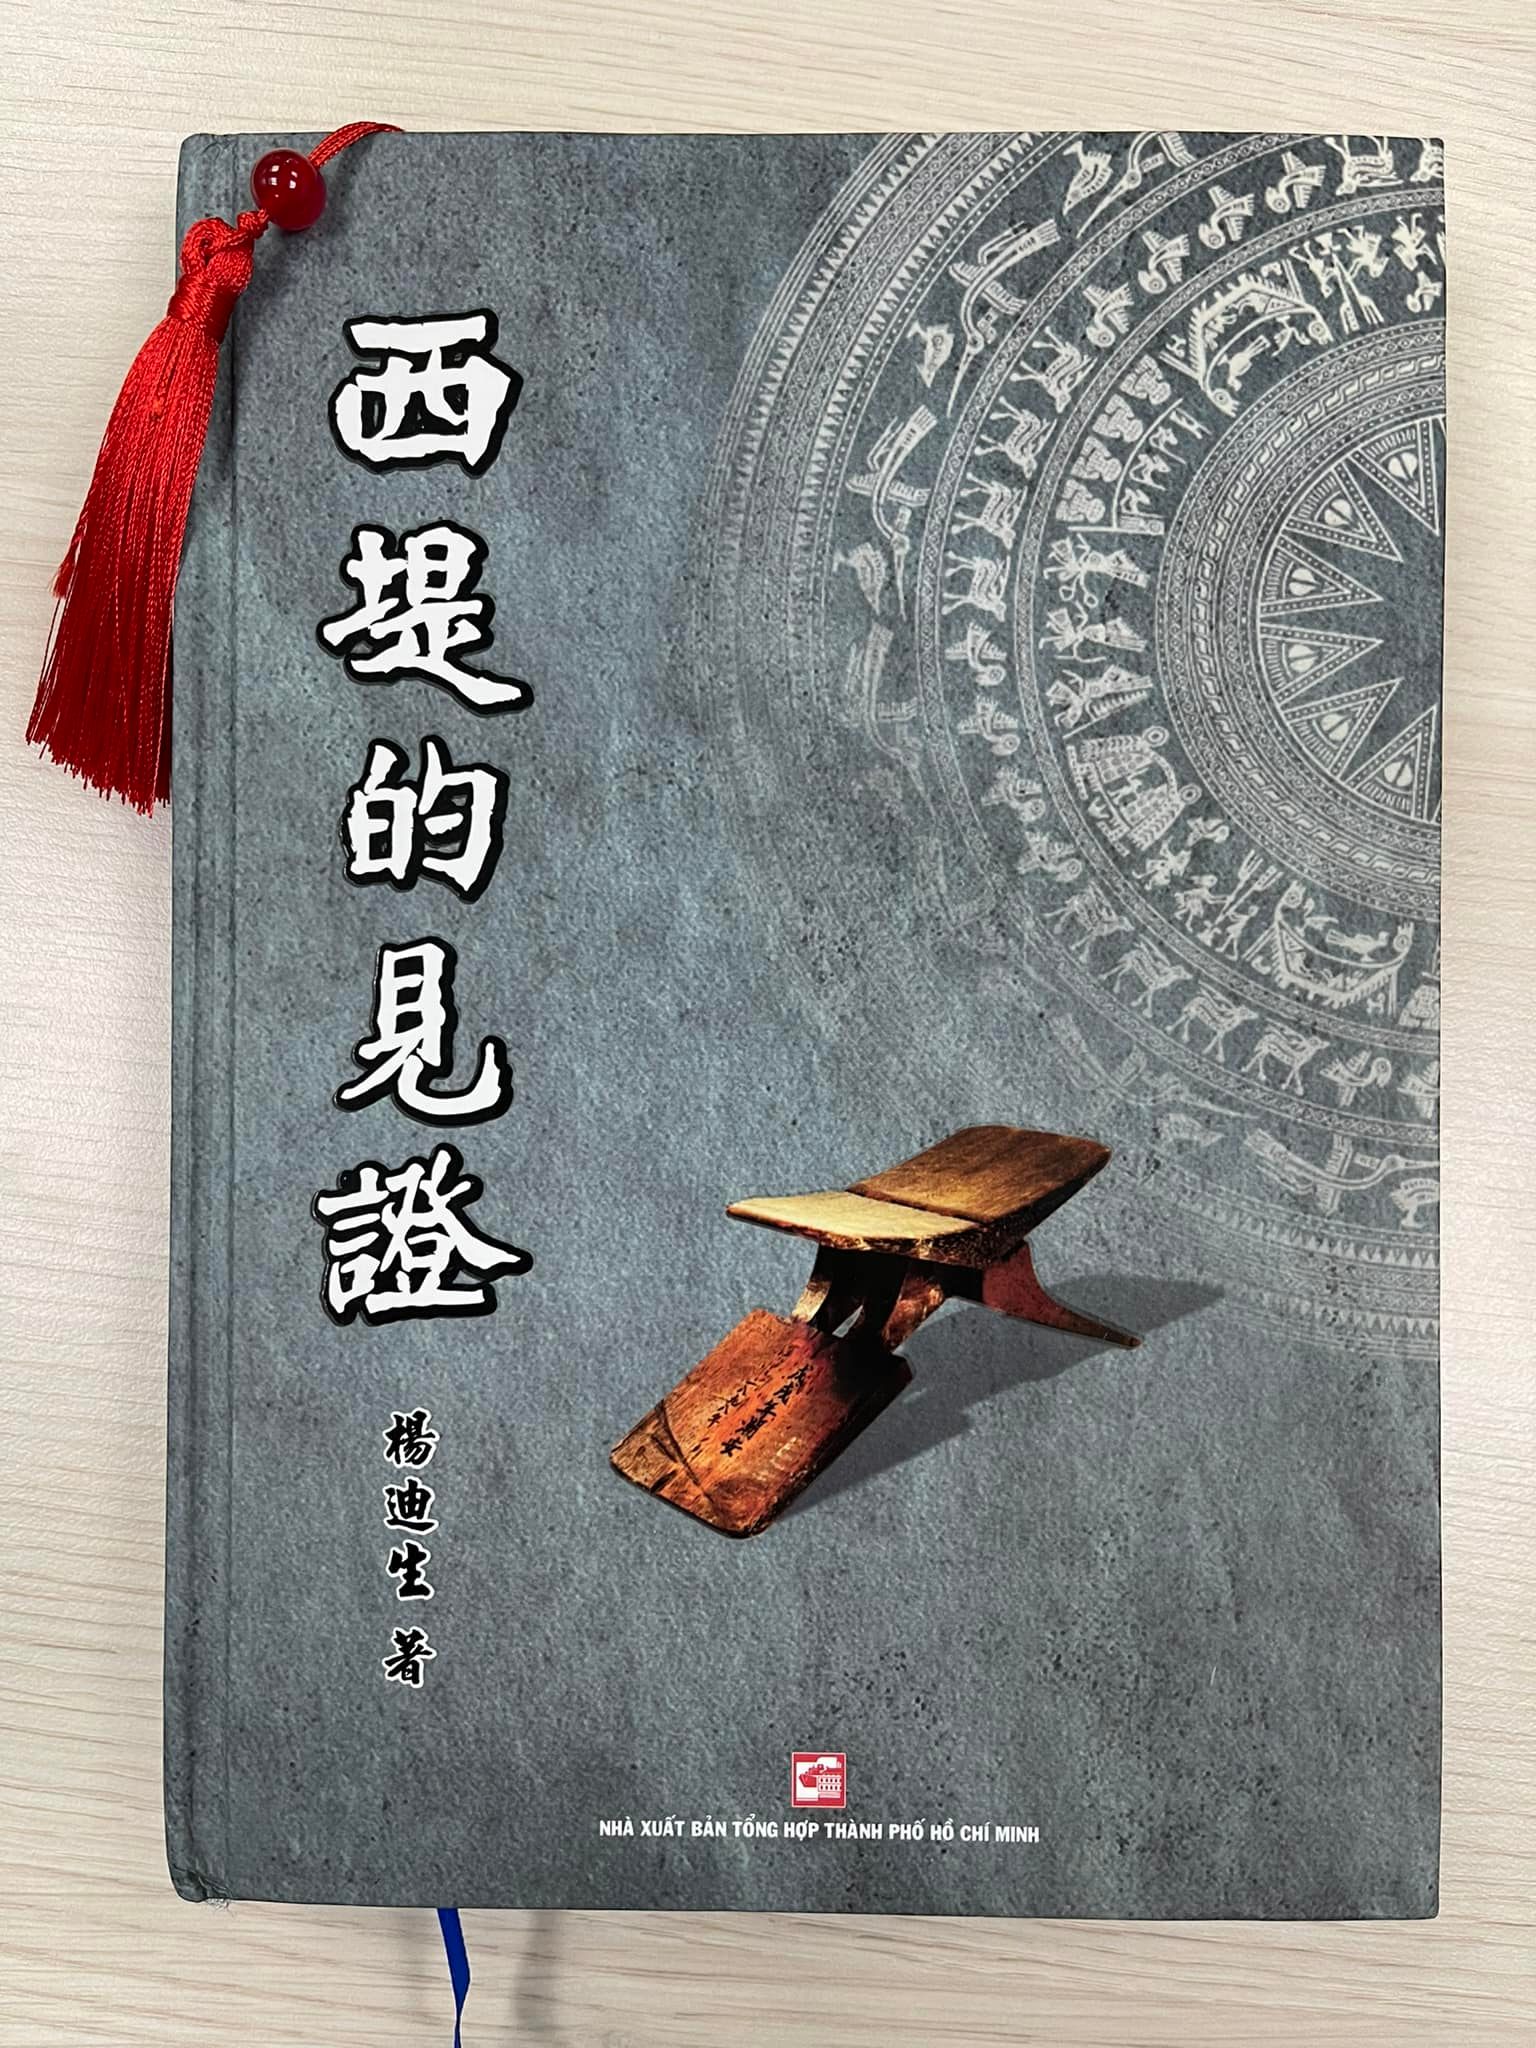 Book about Vietnamese-Chinese Cultural Gallery